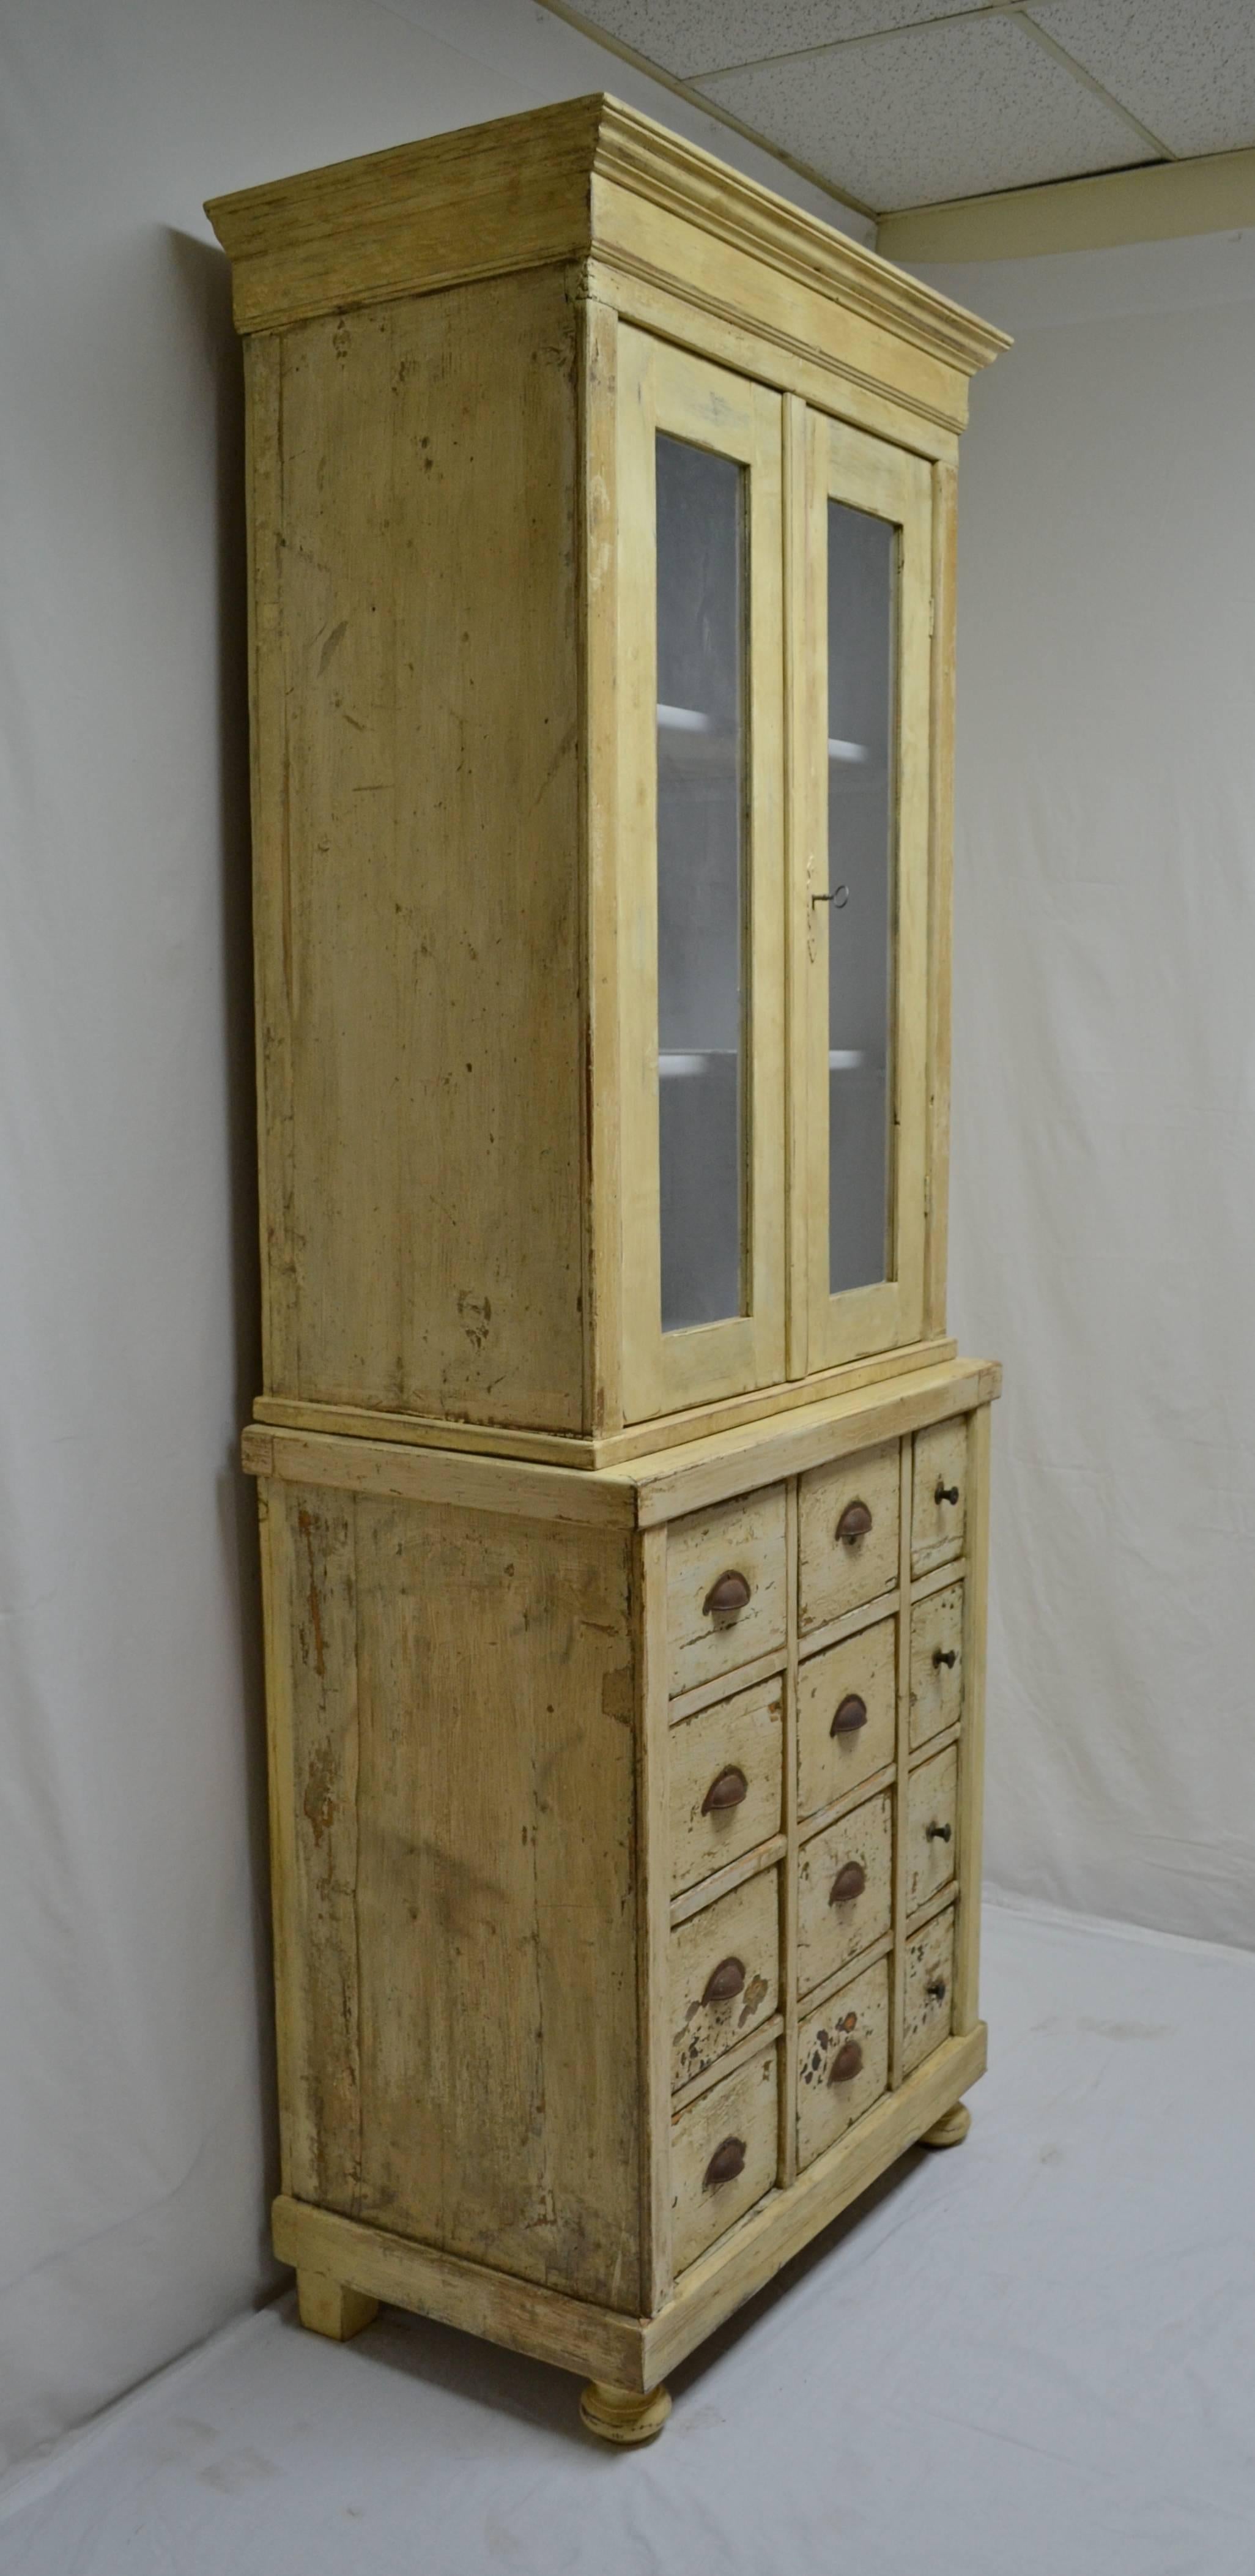 This is an unusually narrow pine apothecary cupboard, built in two pieces. The upper section has two glass doors which open wide to a spacious two shelf interior, fairly recently painted in pale blue. The base has twelve deep original hand-cut